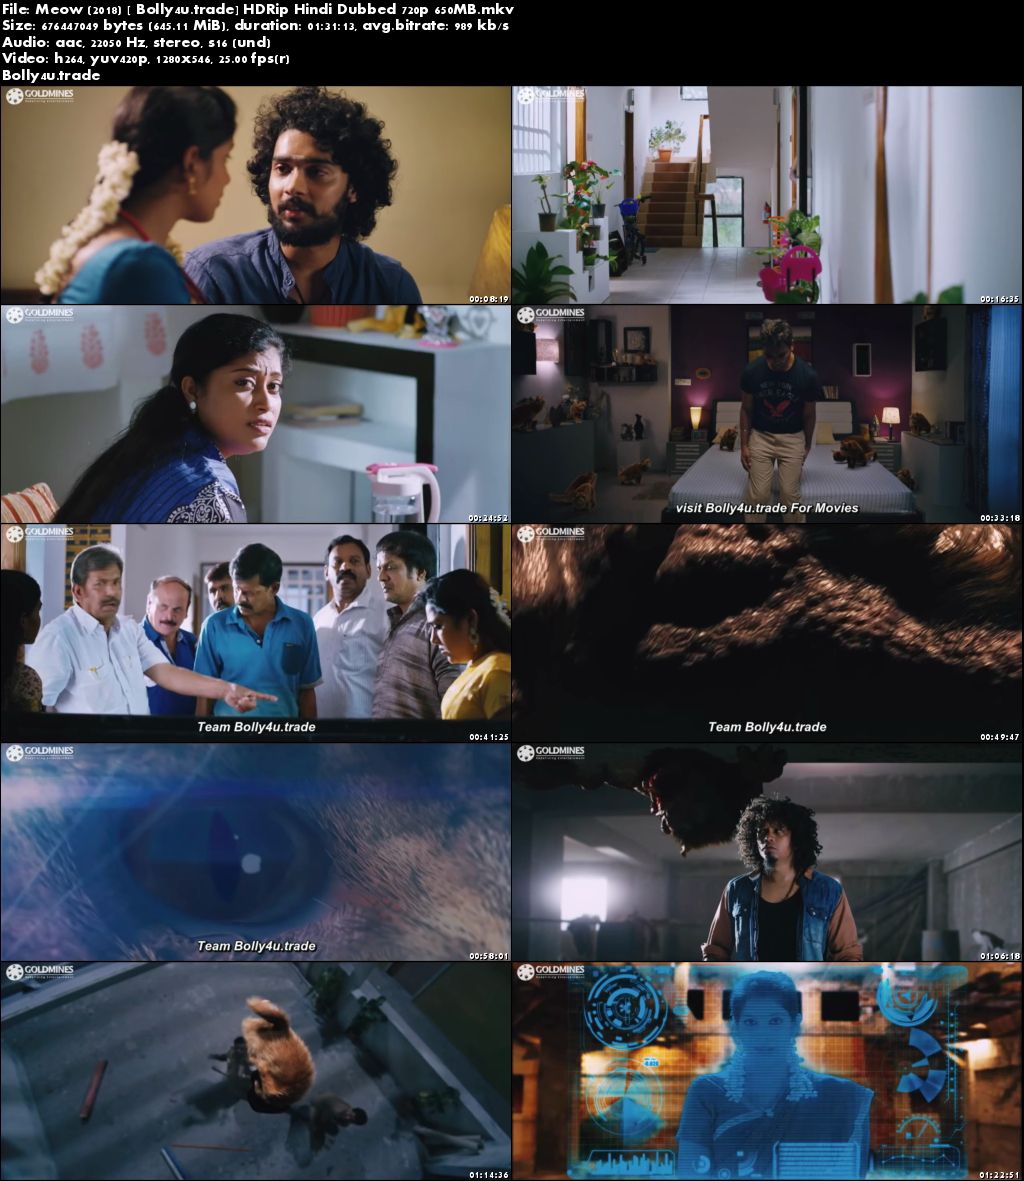 Meow 2018 HDRip 650Mb Full Hindi Dubbed Movie Download 720p